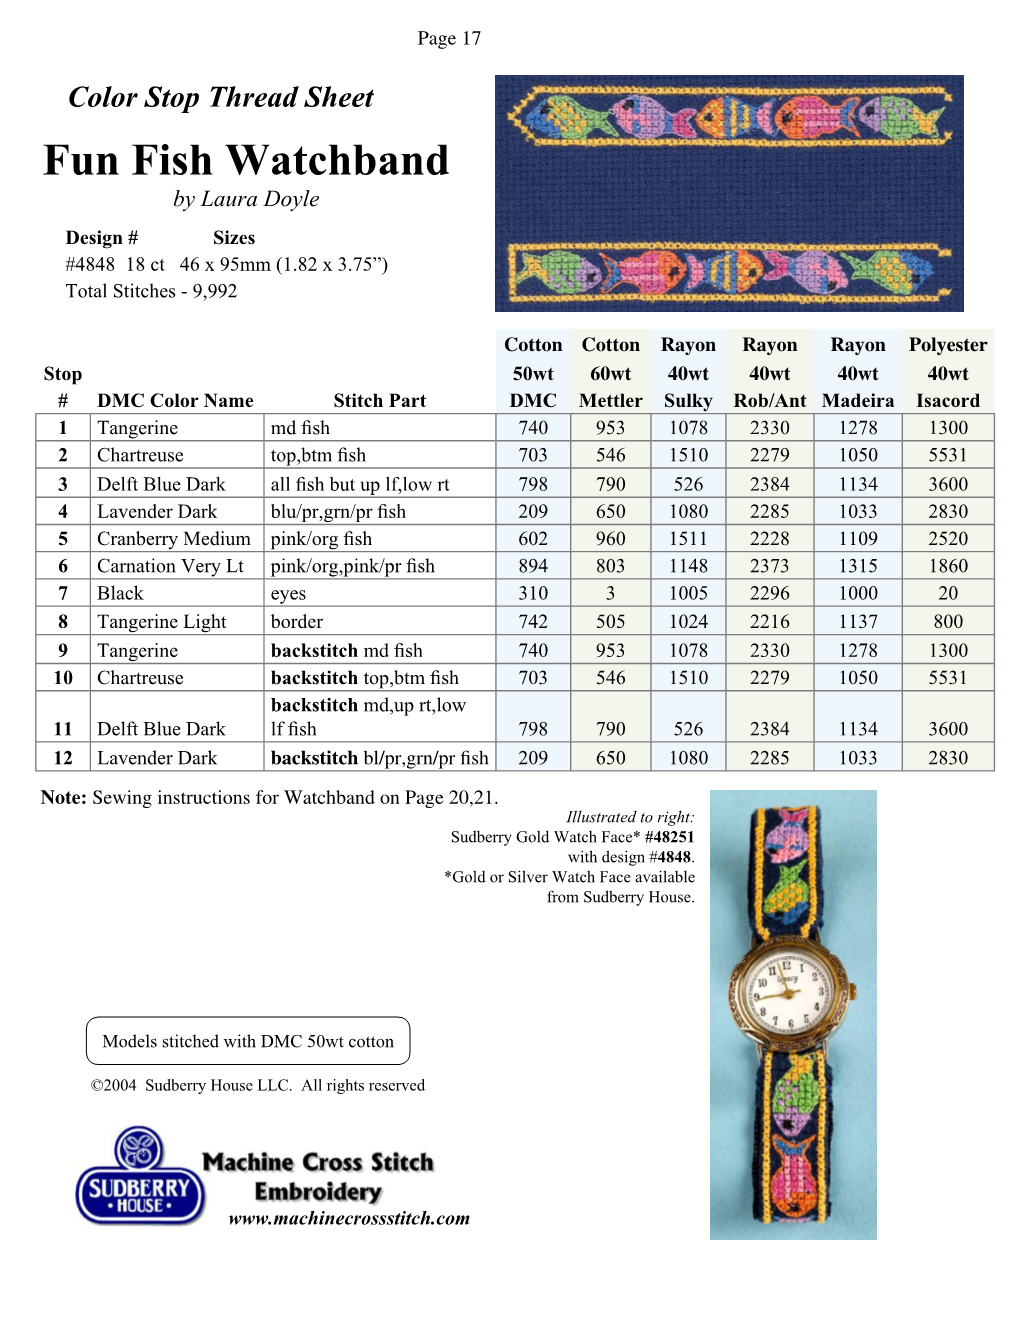 Fun Fish Watchband by Laura Doyle Design # Sizes #4848 18 Ct 46 X 95Mm (1.82 X 3.75”) Total Stitches - 9,992